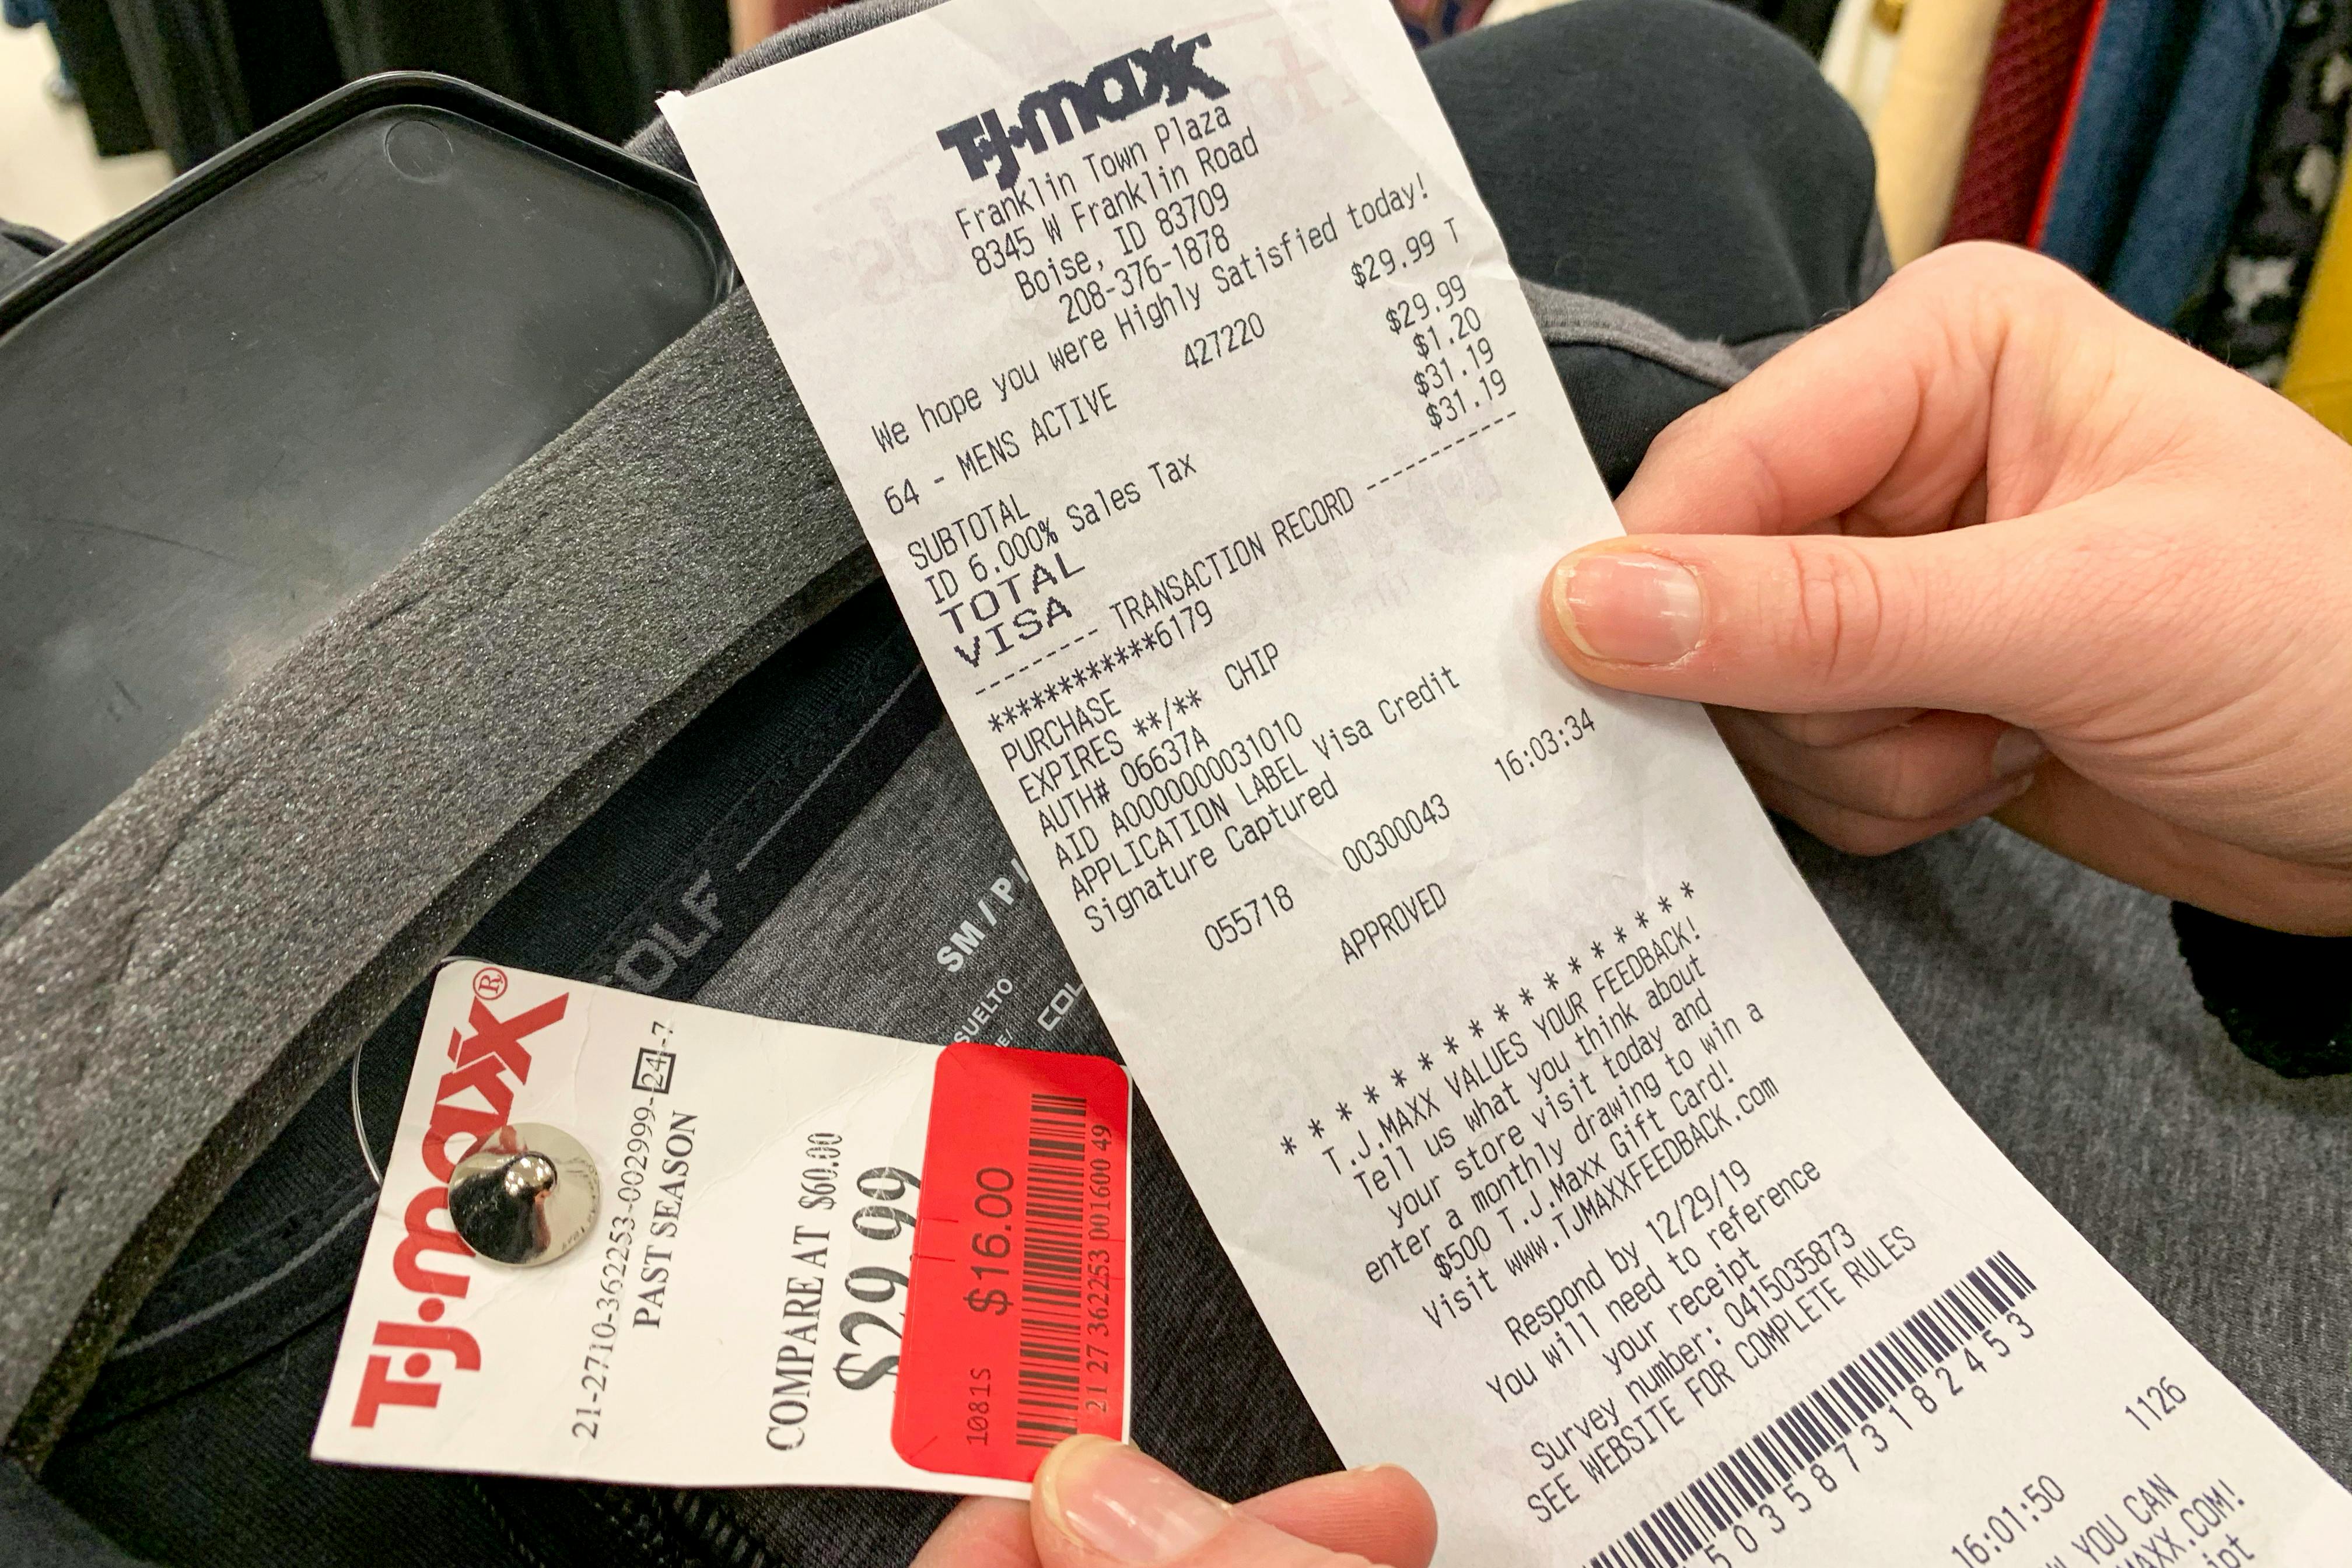 woman showing tj maxx price tag and receipt discrepancy